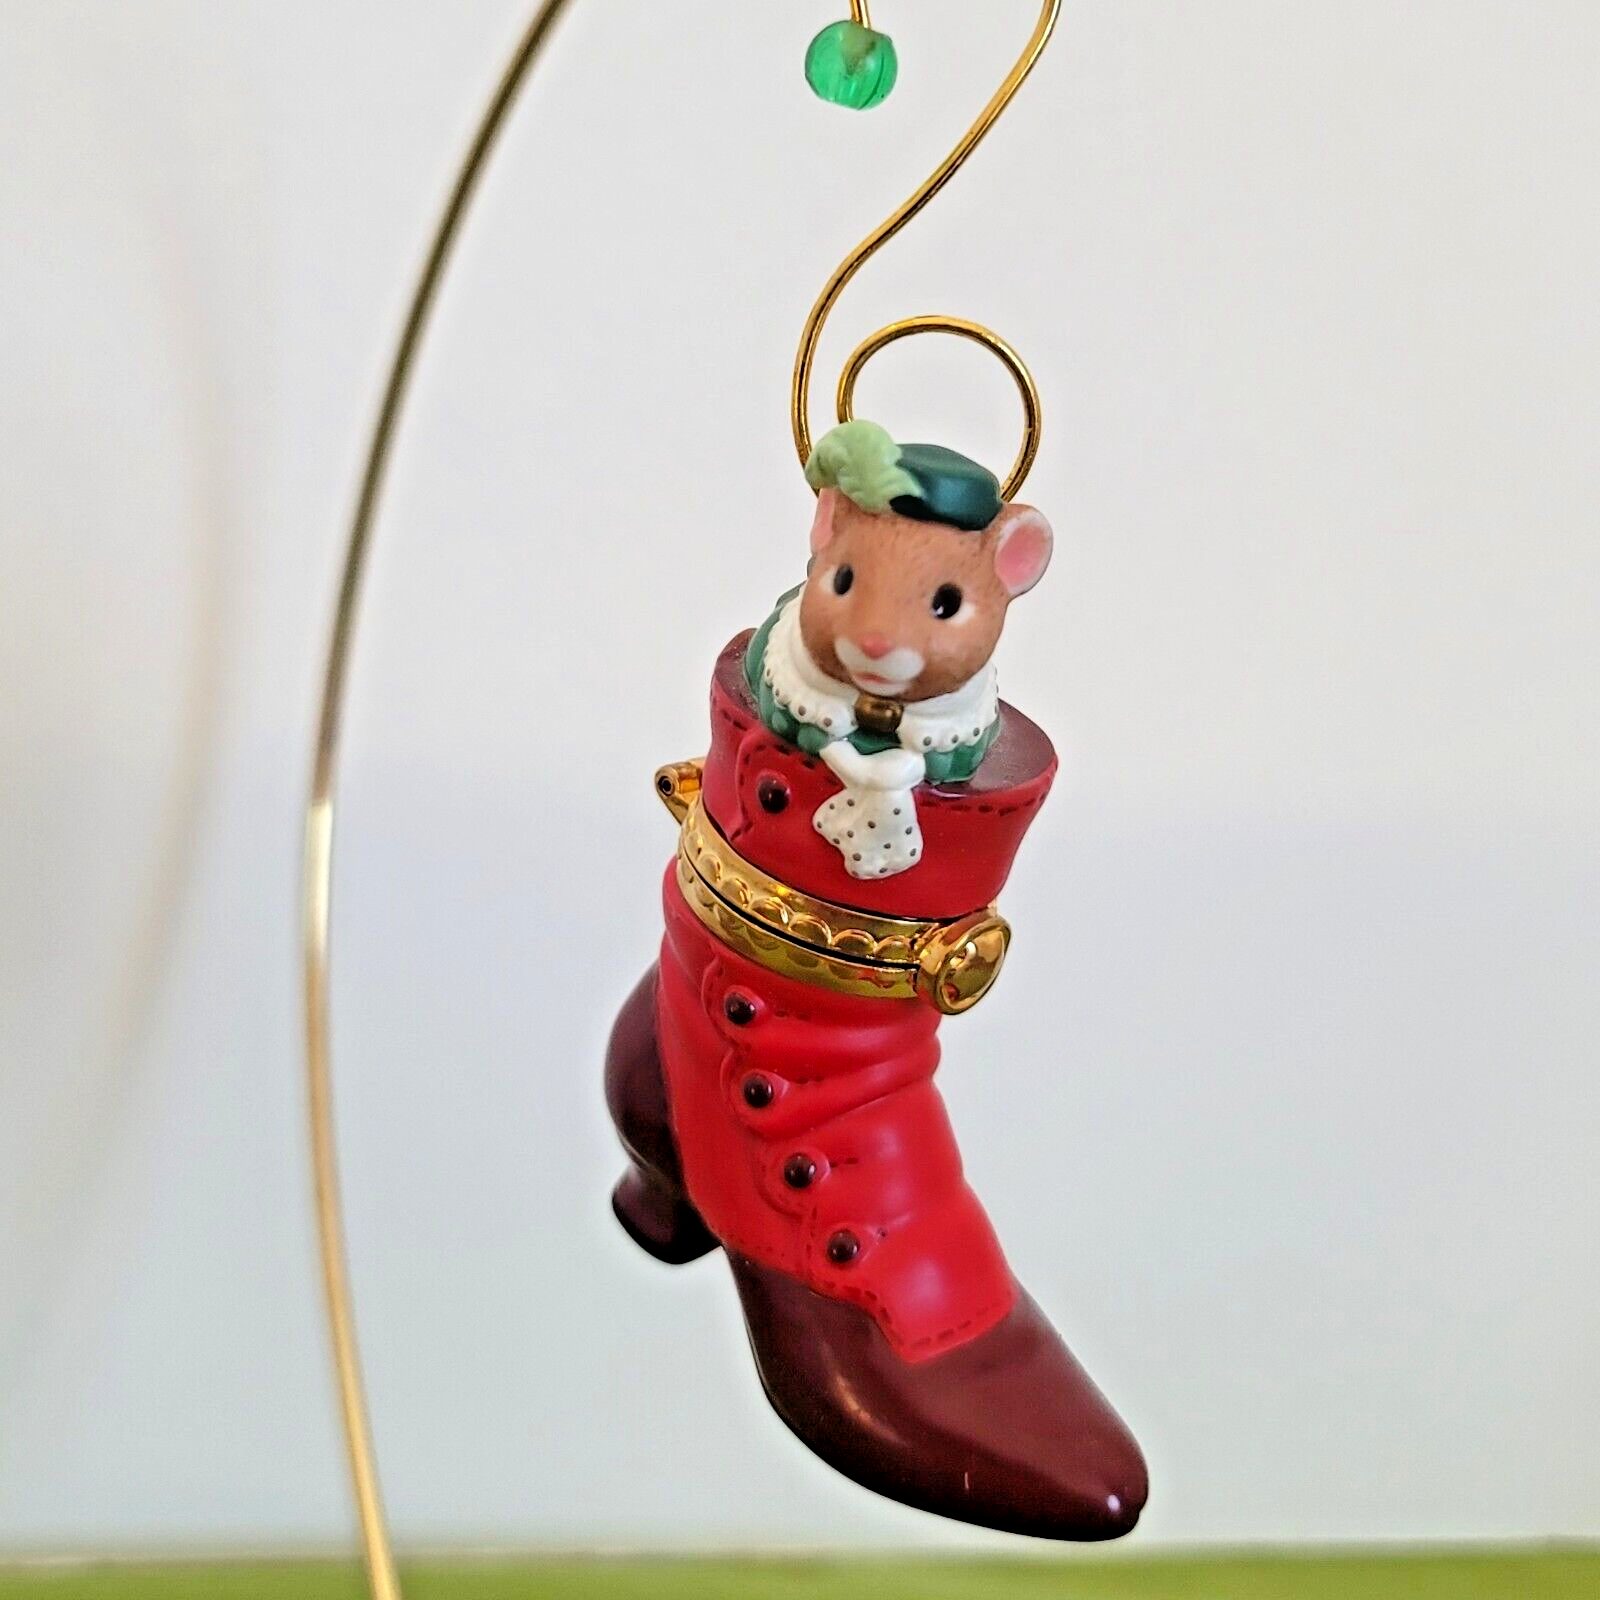 2000 Hallmark Ornament Fashion Afoot Mouse in a Boot Trinket Box #1 in Series - $6.92